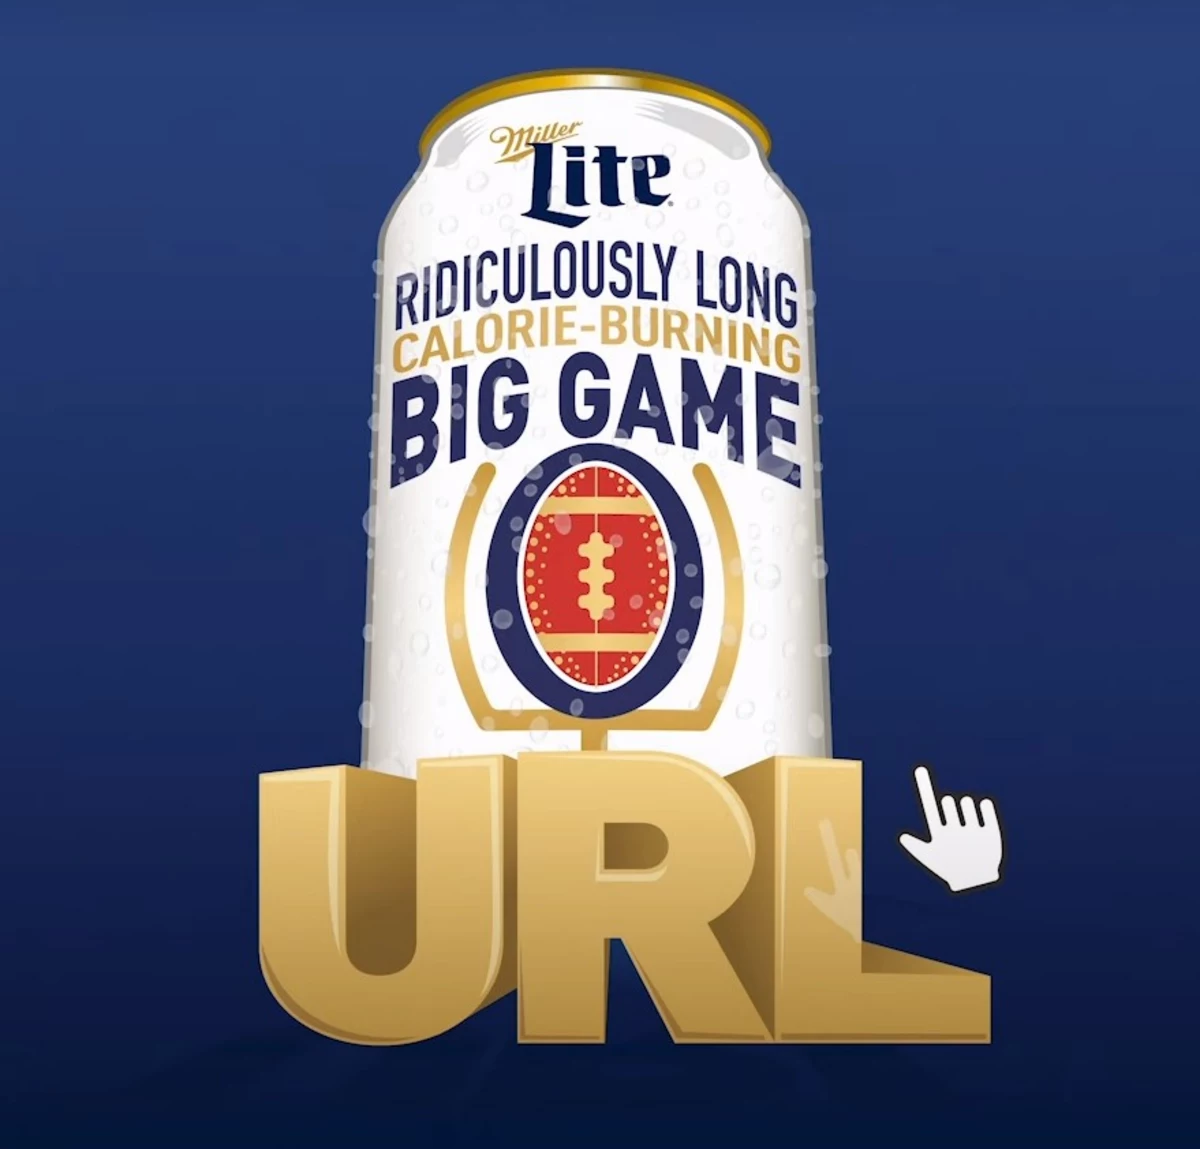 Miller Lite to give free beer at bars during Game 1 of the